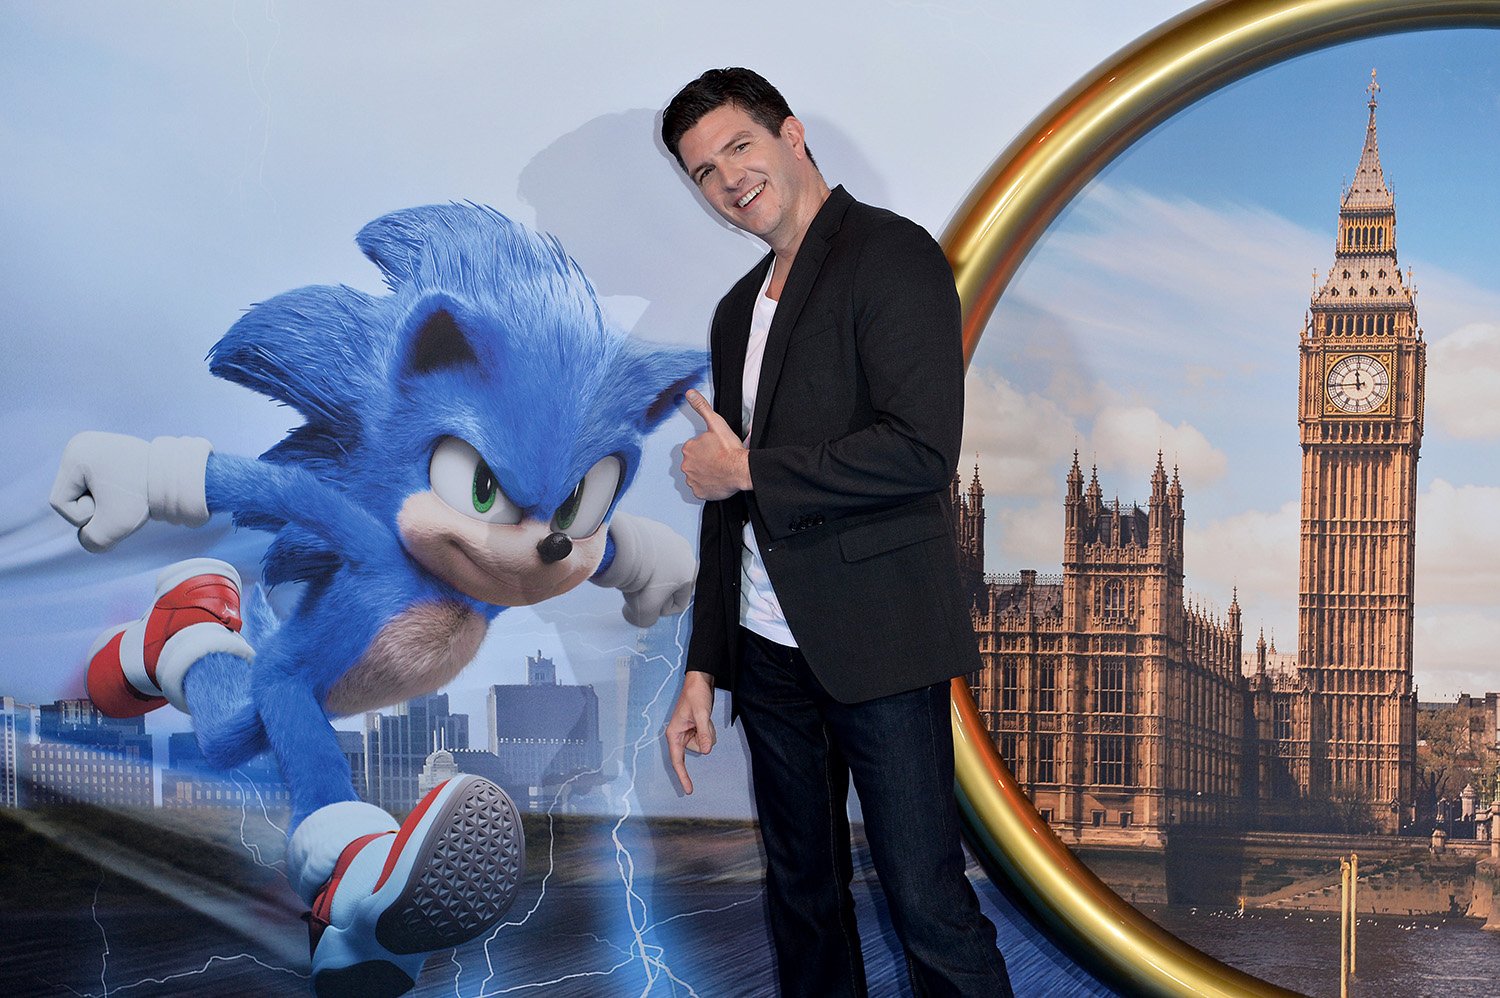 Sonic 2 Director Jeff Fowler at the Sonic the Hedgehog Fan Screening in London